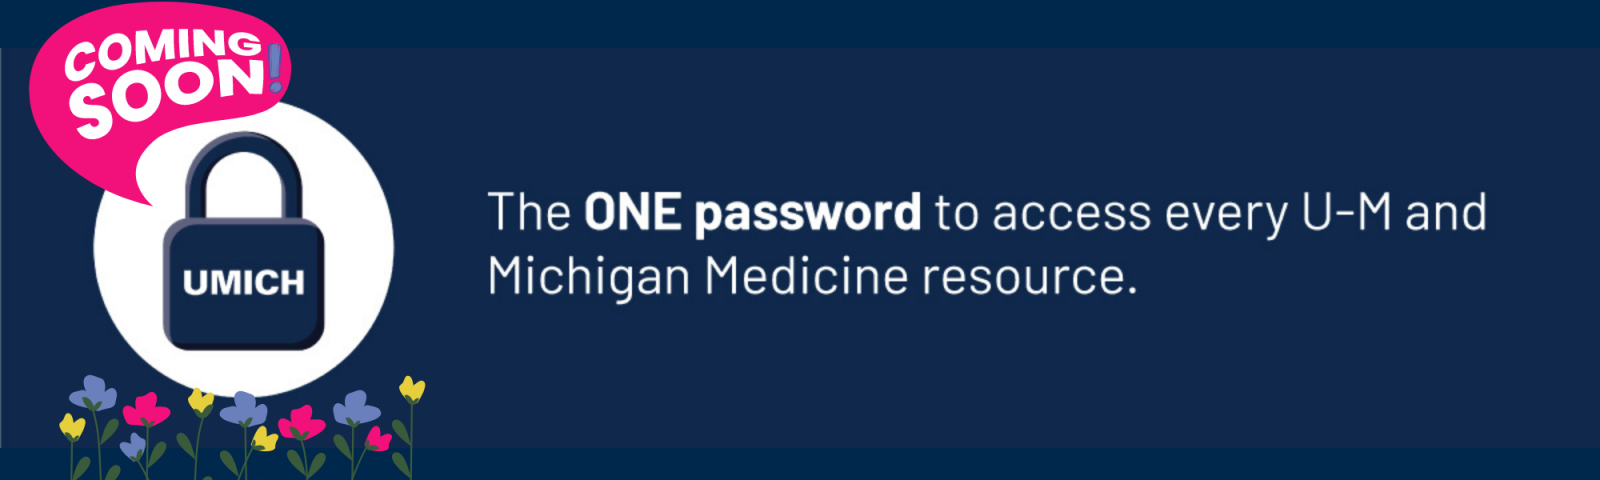 UMICH: The one password to access every U-M and Michigan Medicine resource.